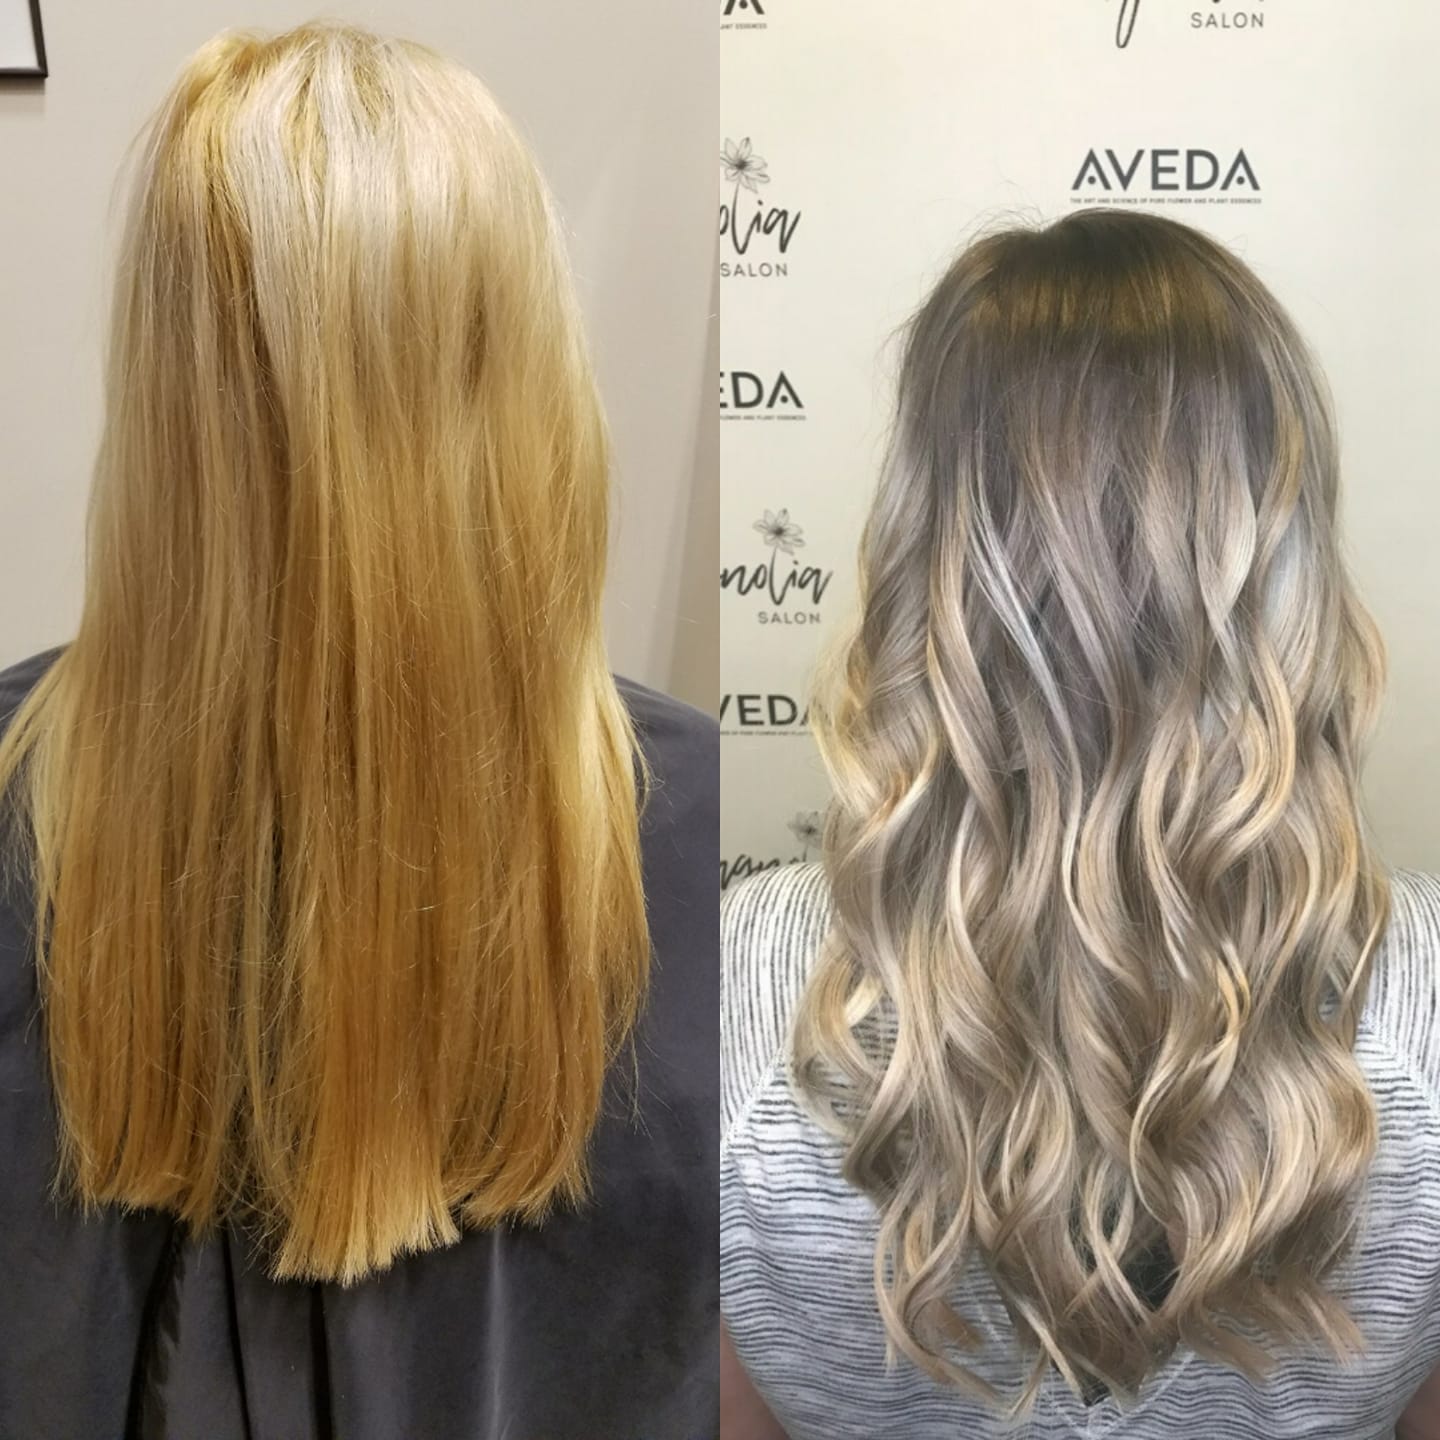 From home dye job to pintrest picture. This client was a joy